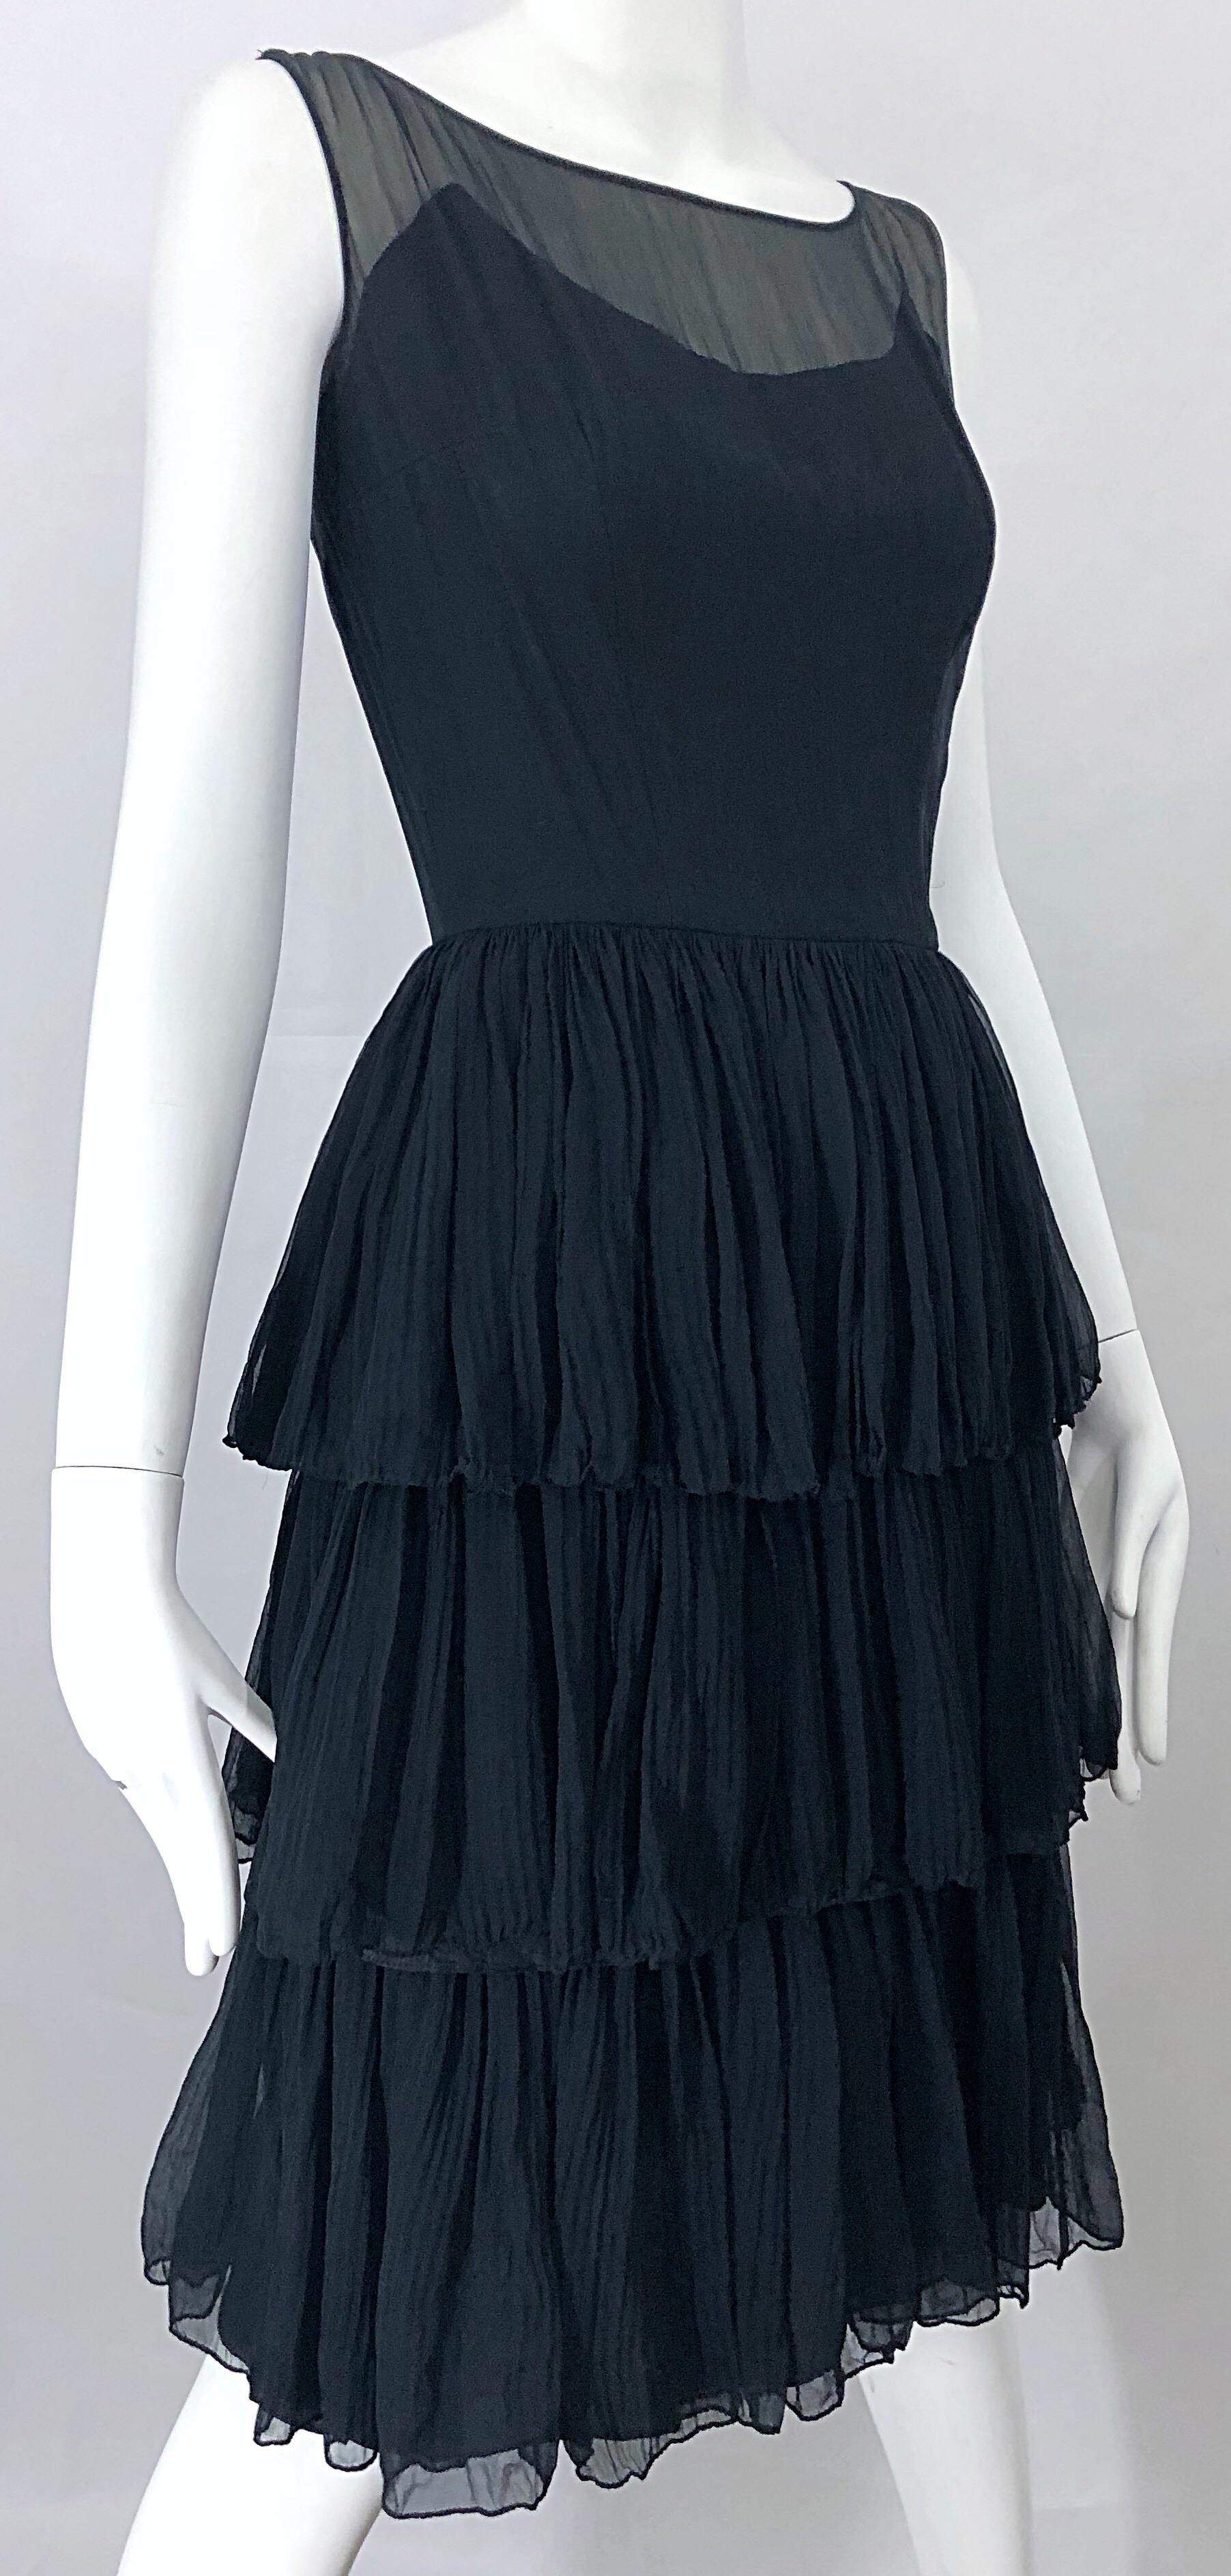 1950s Suzy Perette Black Silk Chiffon Nude Illusion Couture Vintage 50s Dress In Excellent Condition For Sale In San Diego, CA